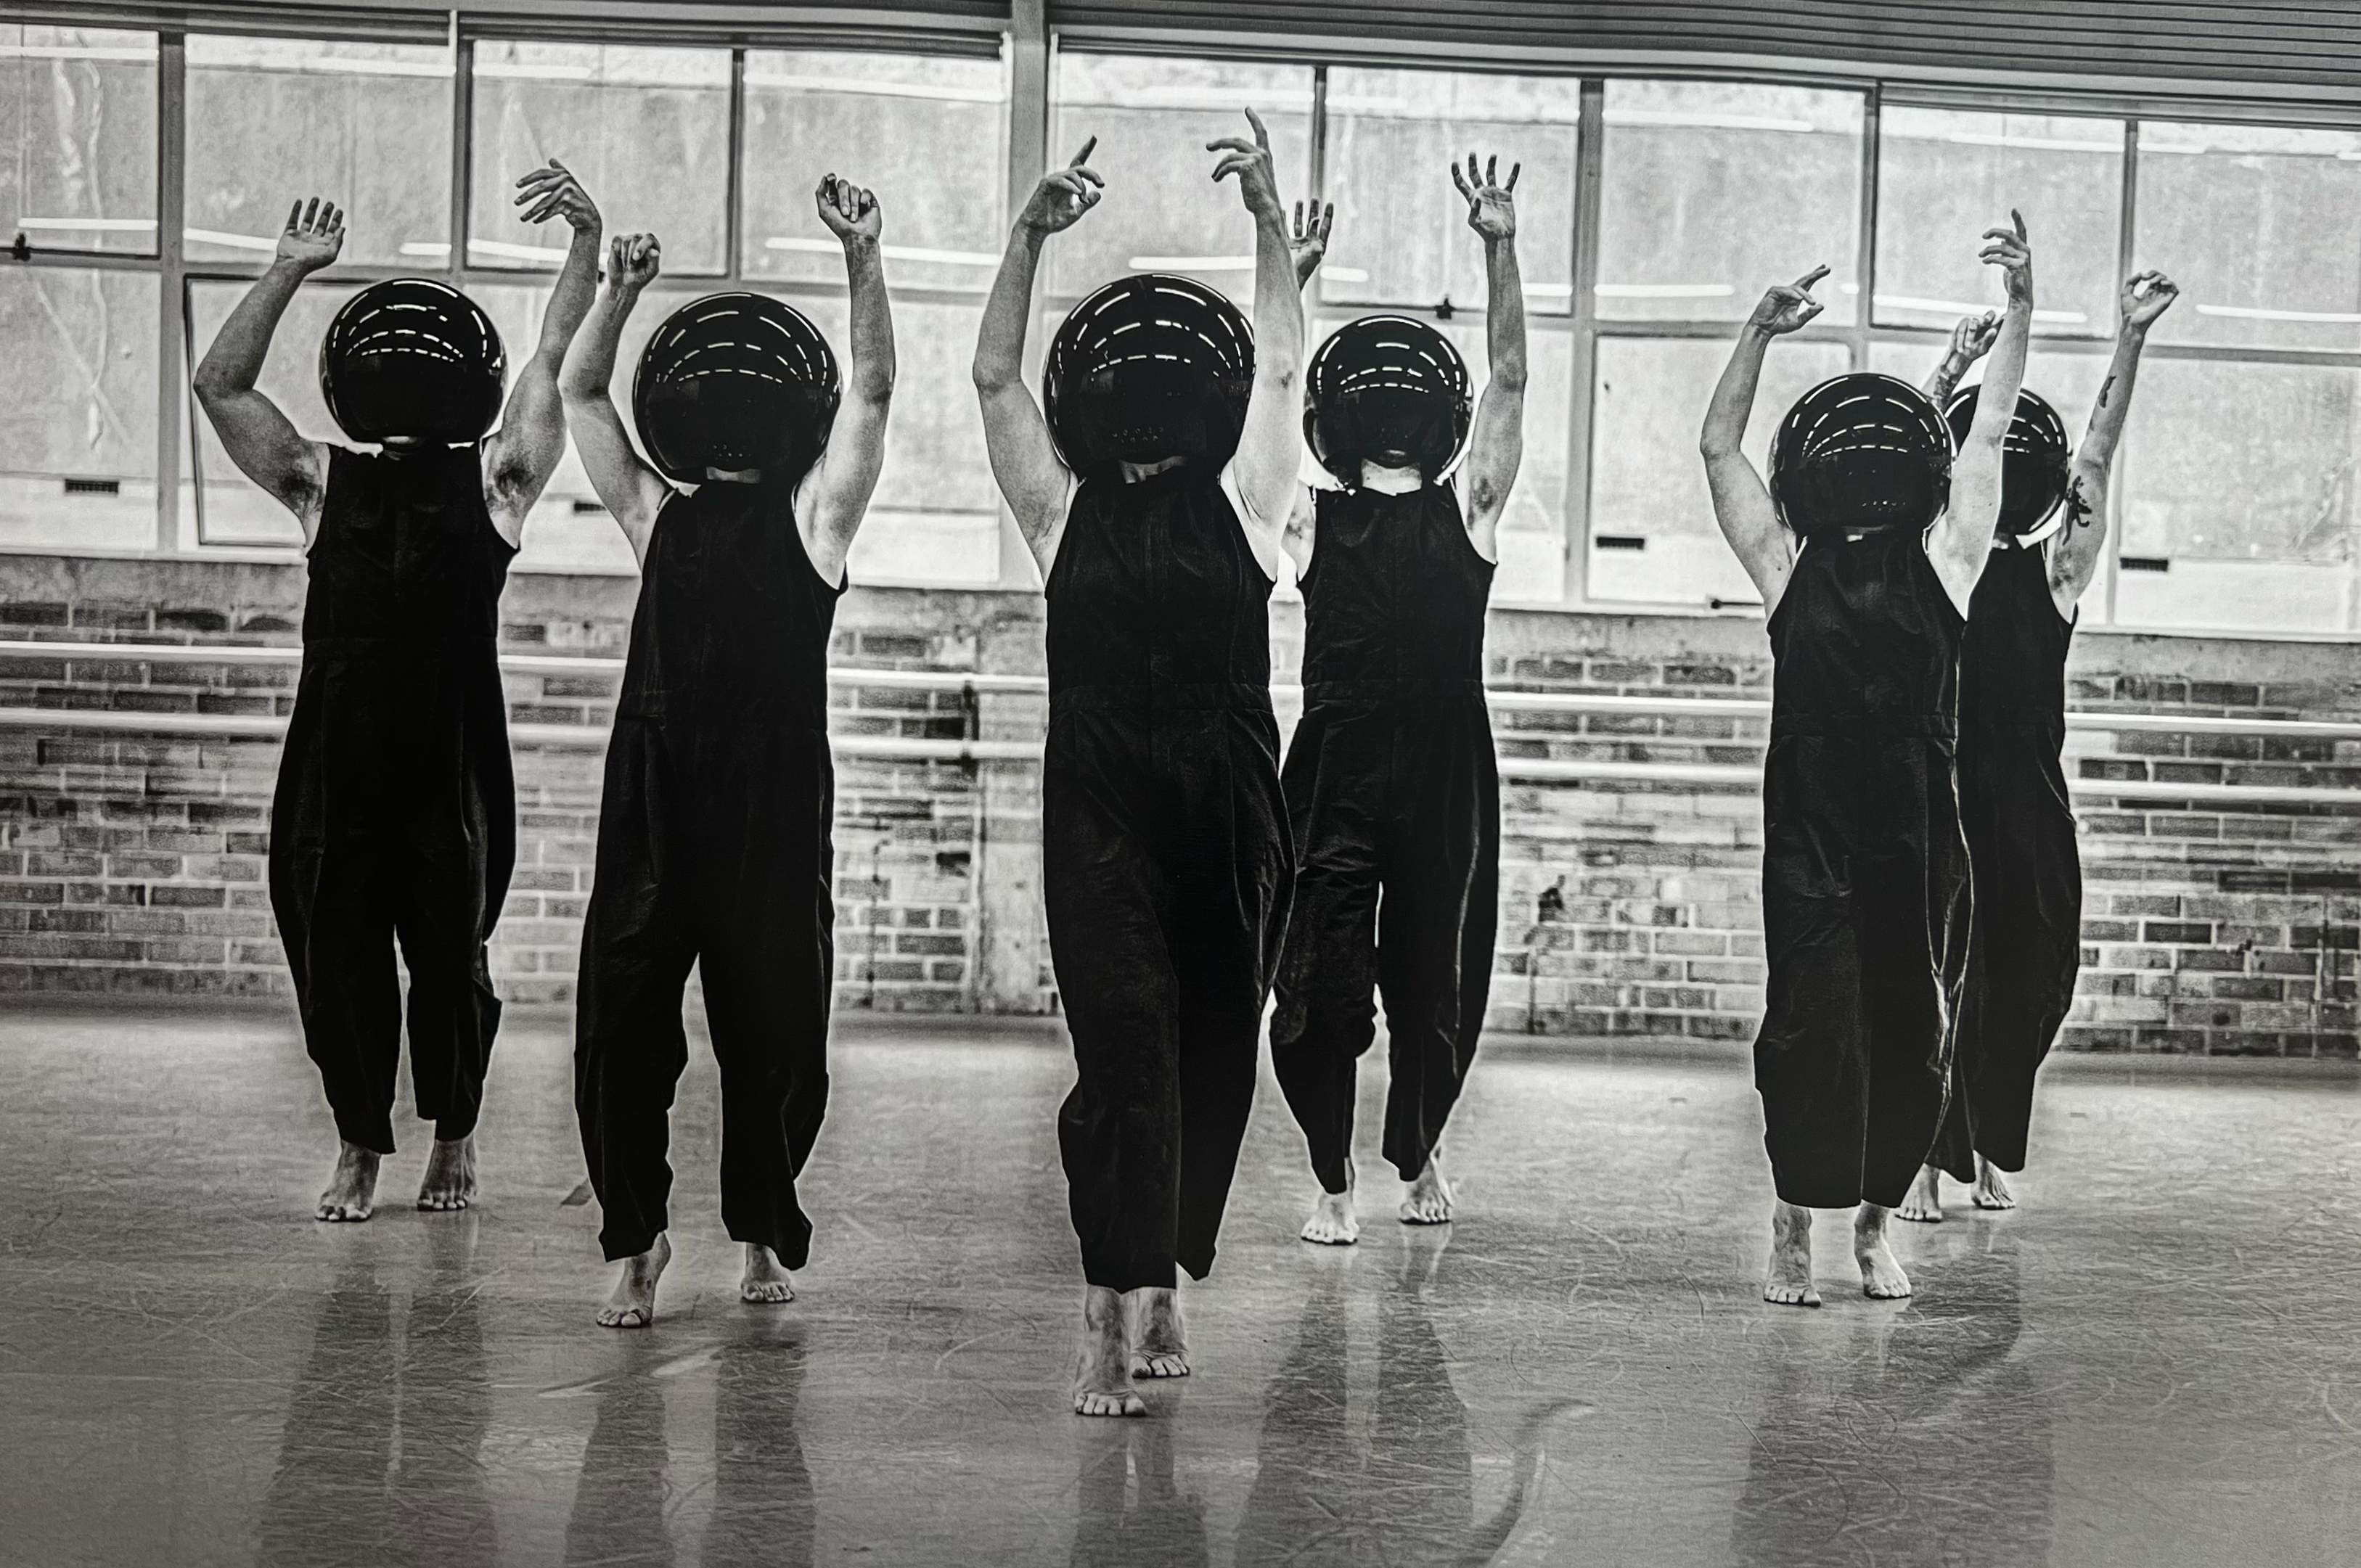 A group of dancers in formation standing on their toes wearing identical round black helmets that obscure their faces